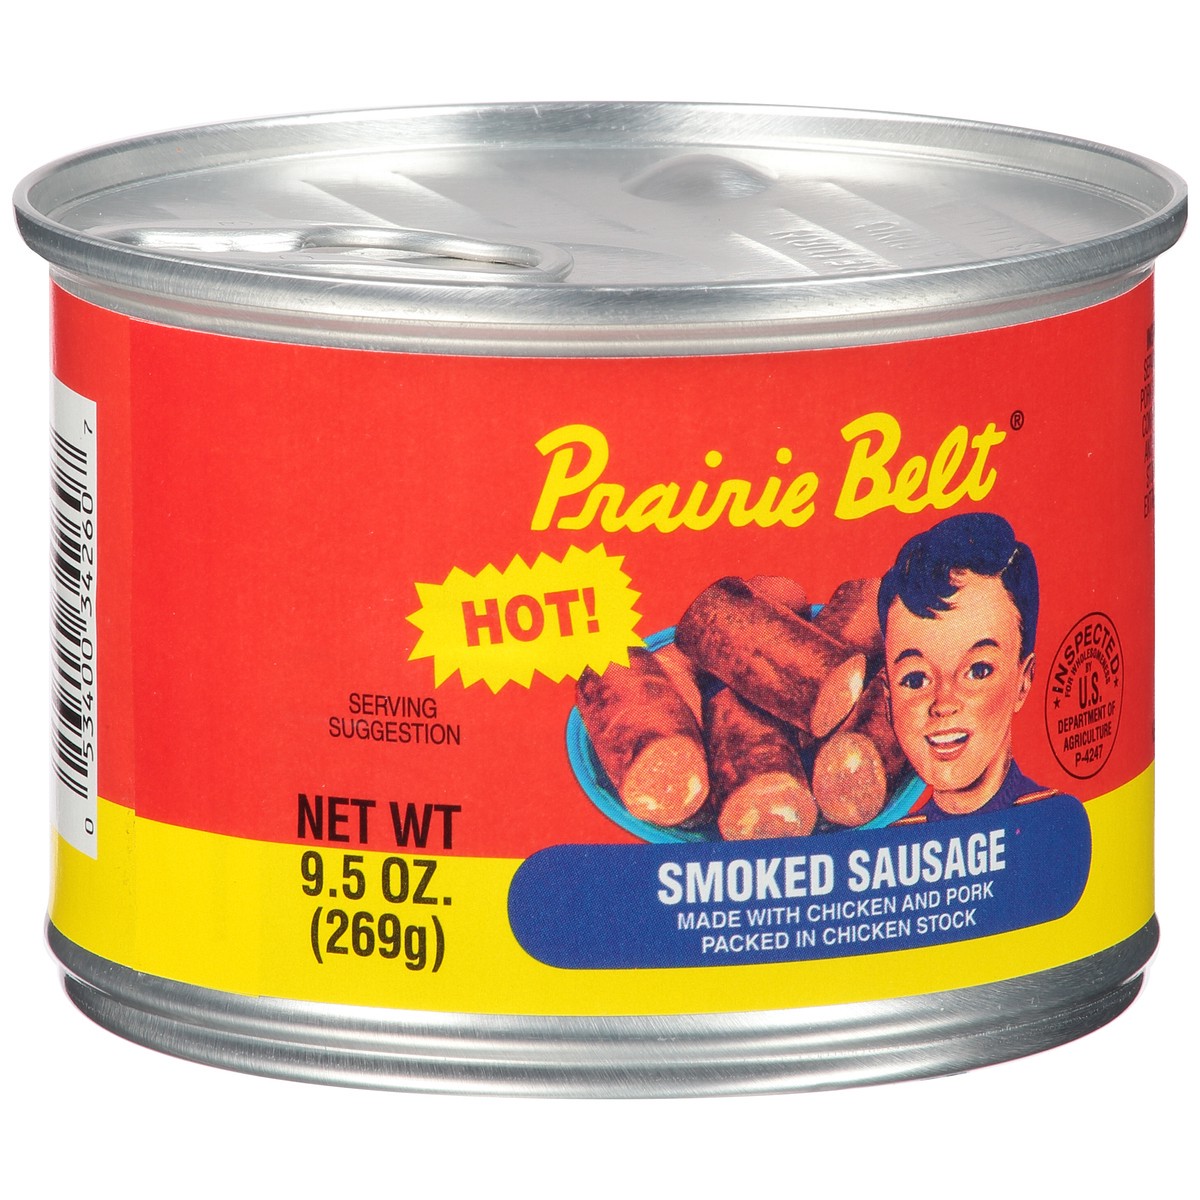 slide 2 of 14, Prairie Belt Hot Smoked Sausage 9.5 oz. Pull-Top Can, 9.5 oz